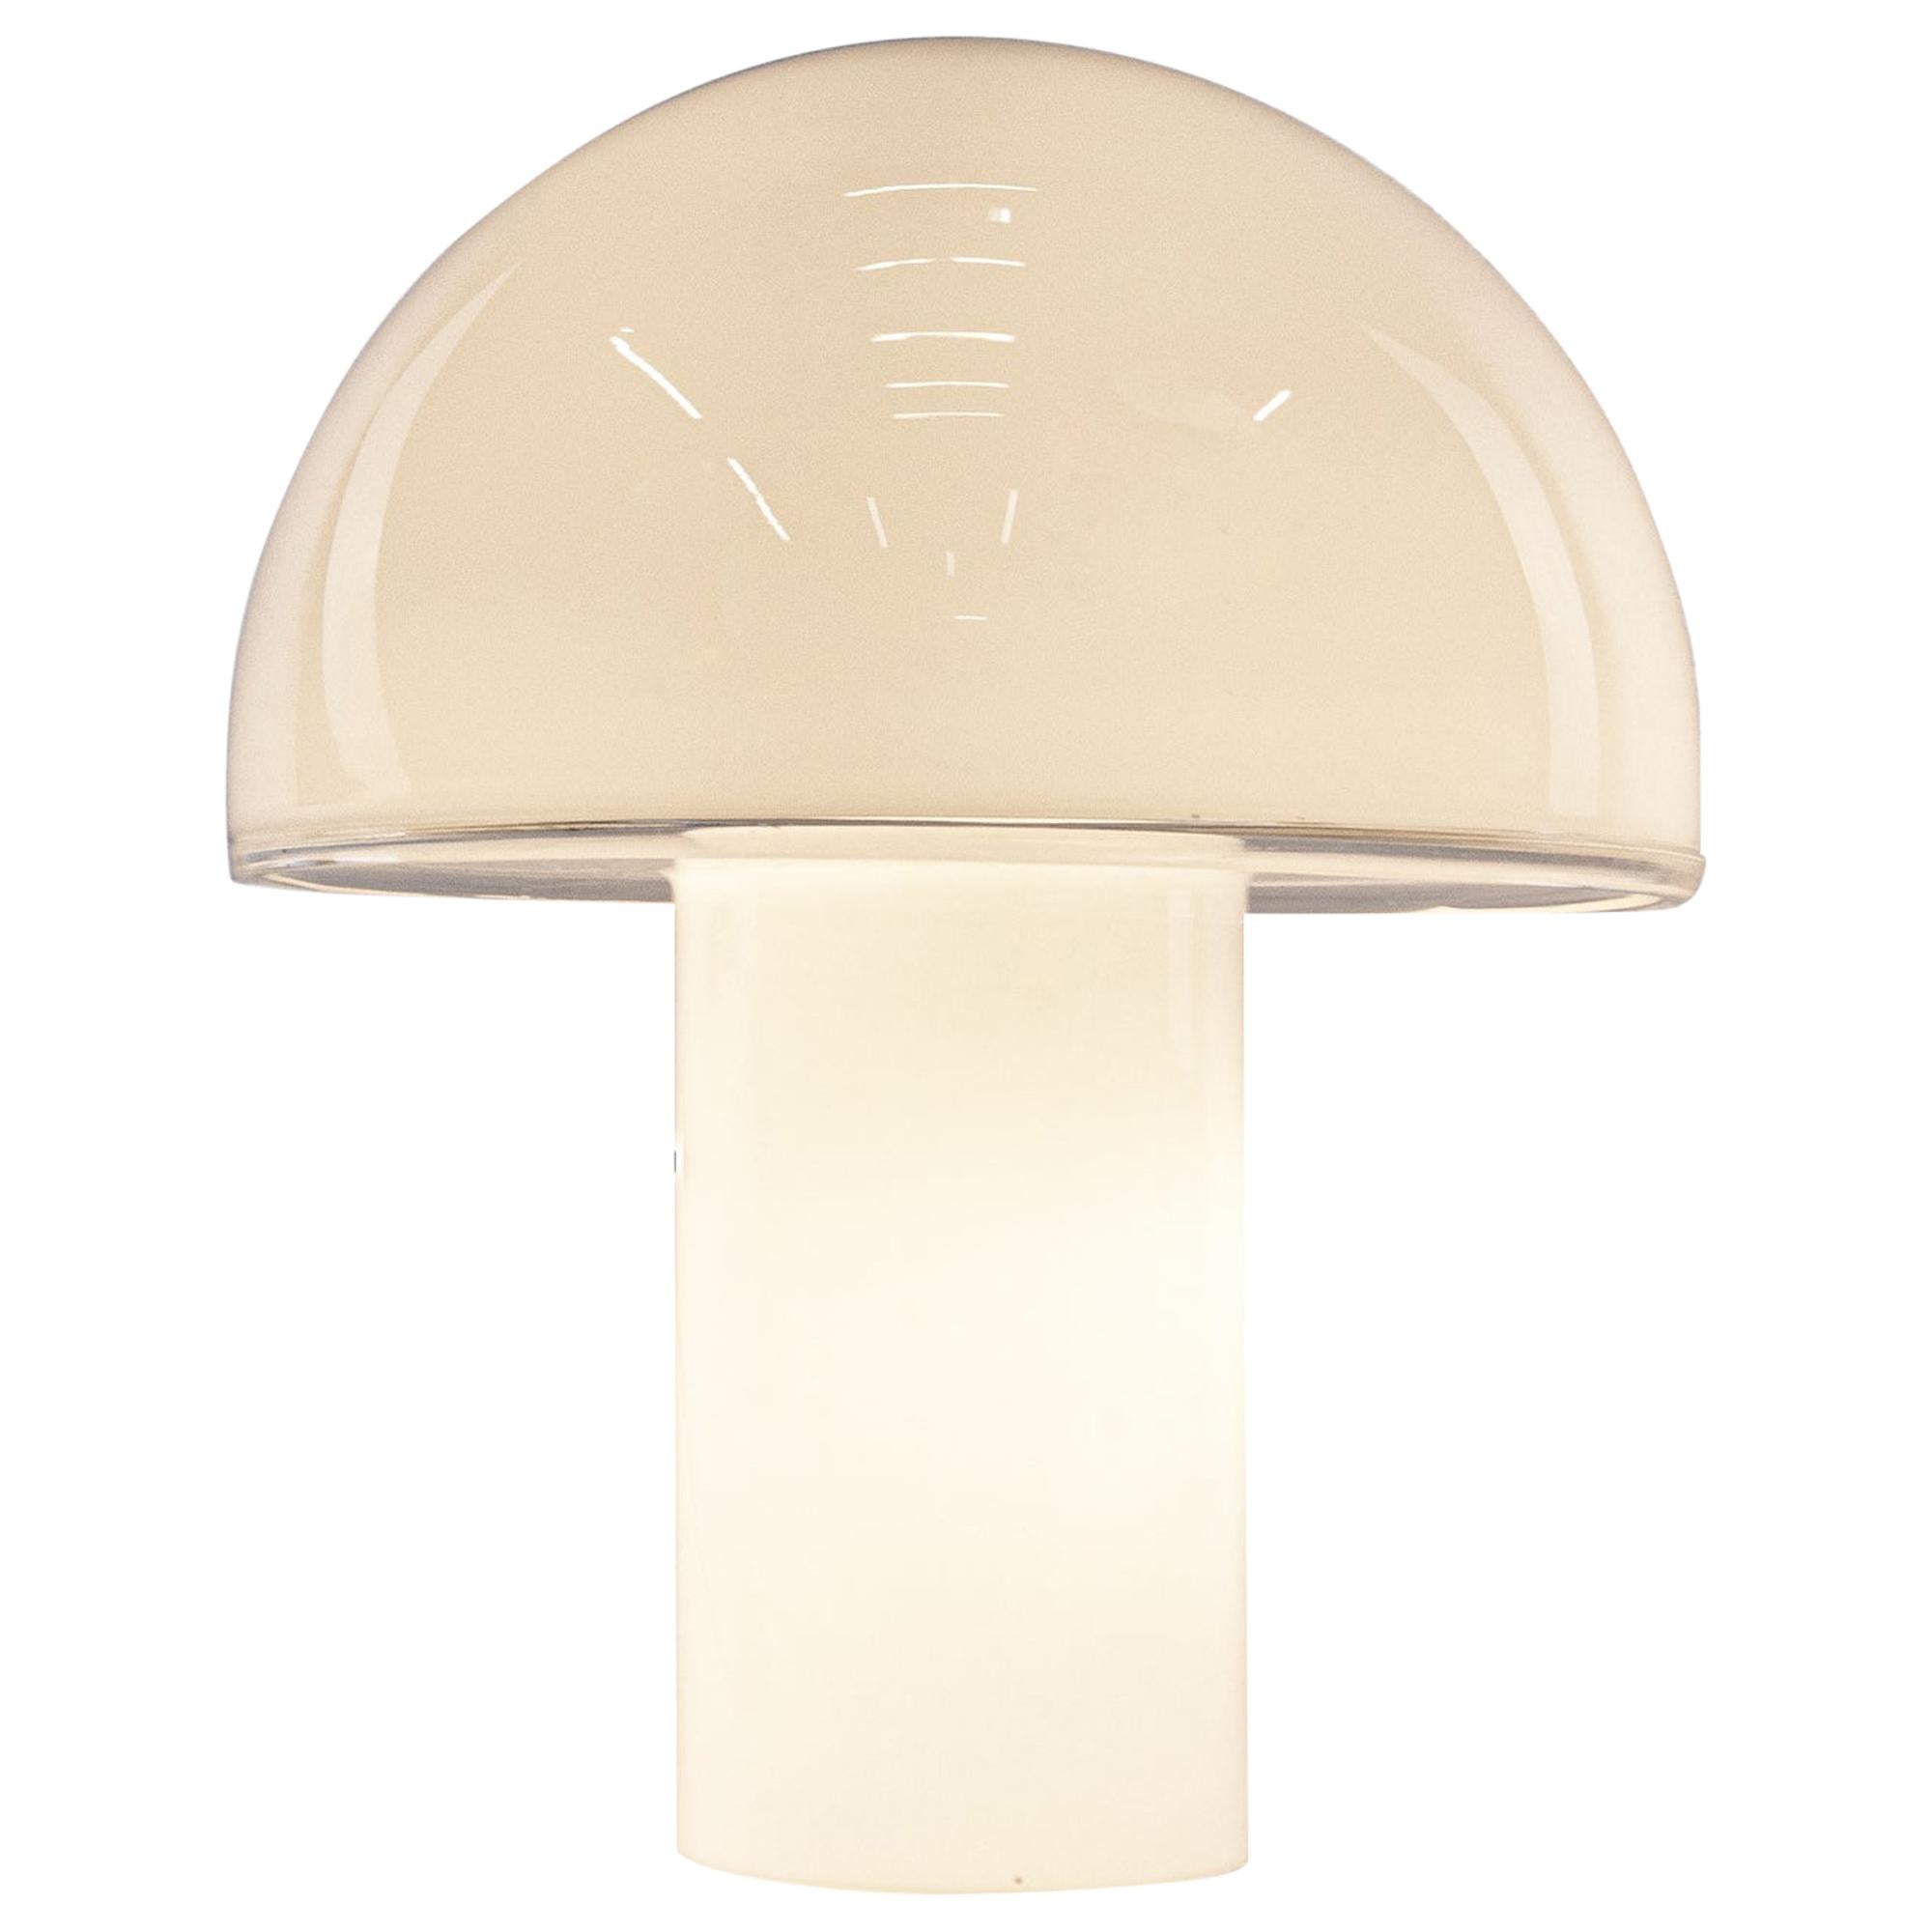 Onfale Big, Murano Glass Mushroom Lamp by Luciano Vistosi for Artemide